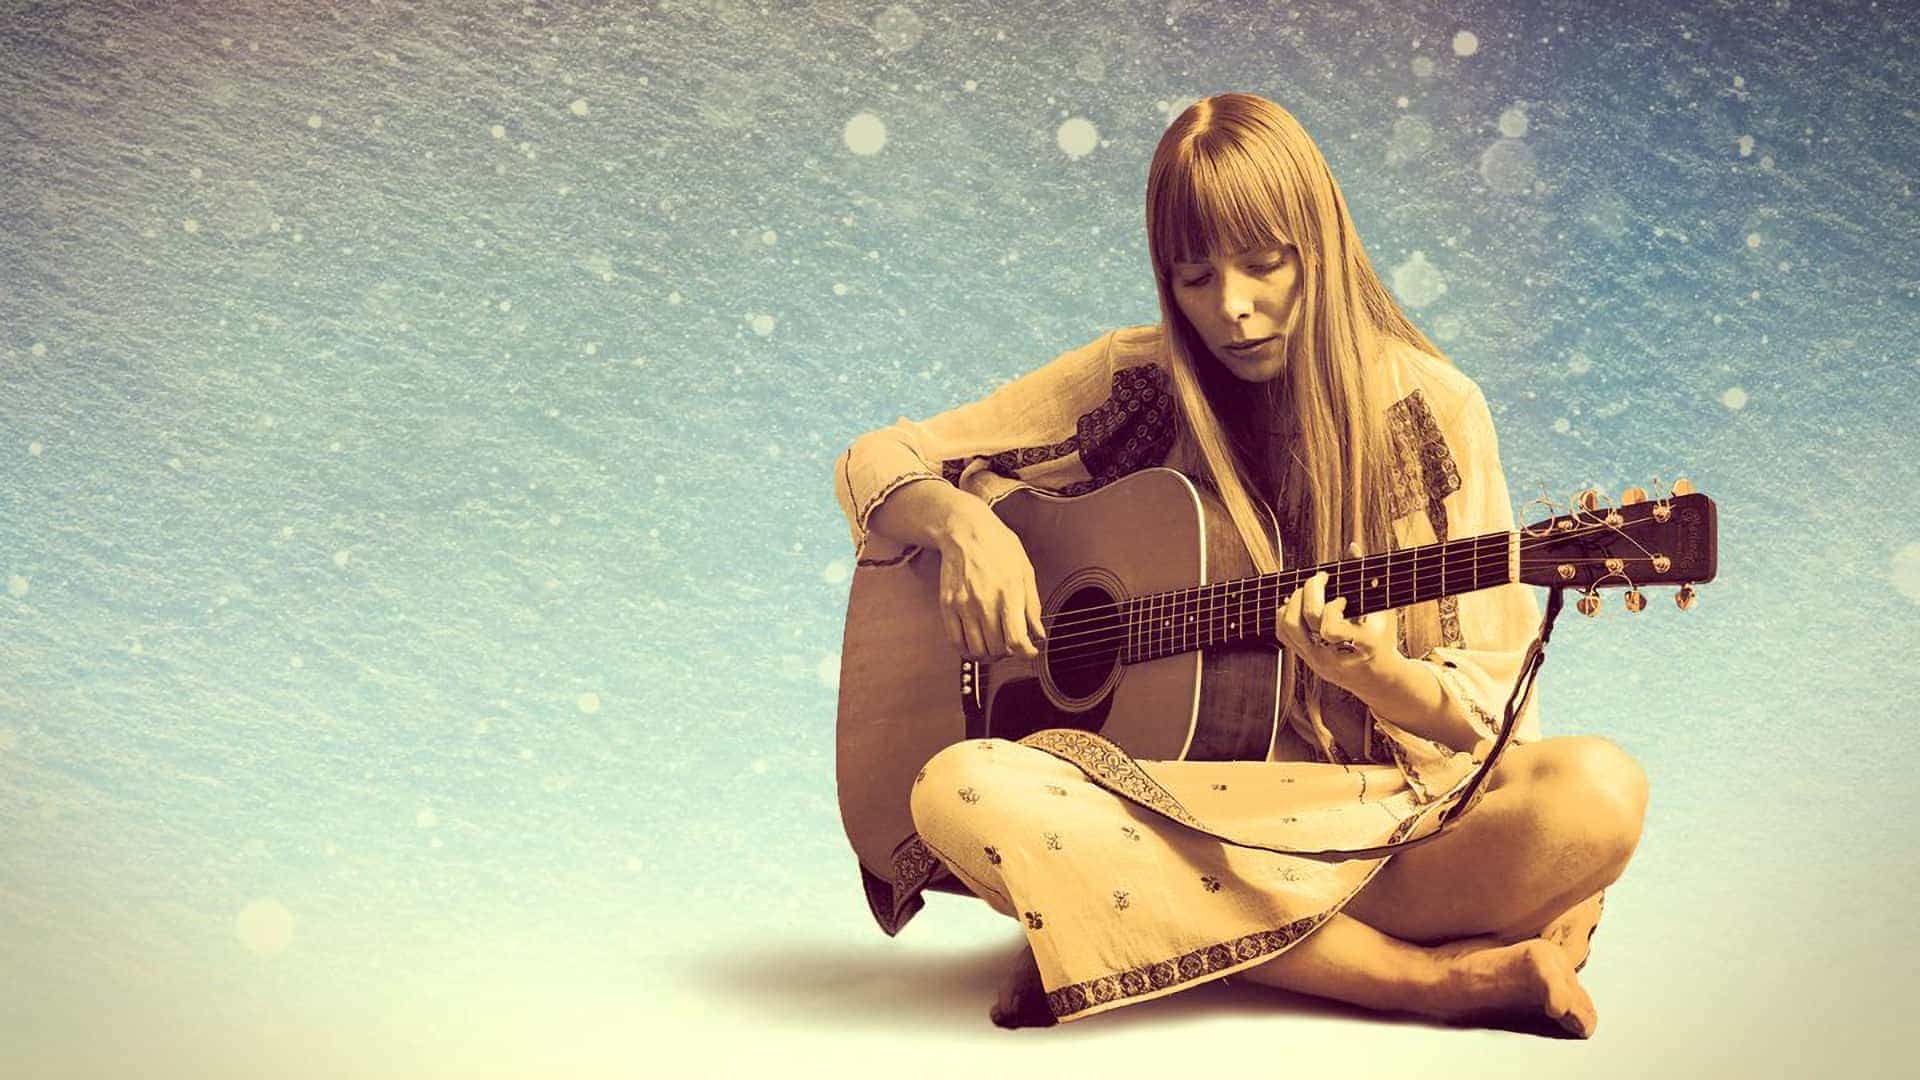 Court and Spark - The Joni Mitchell Songbook